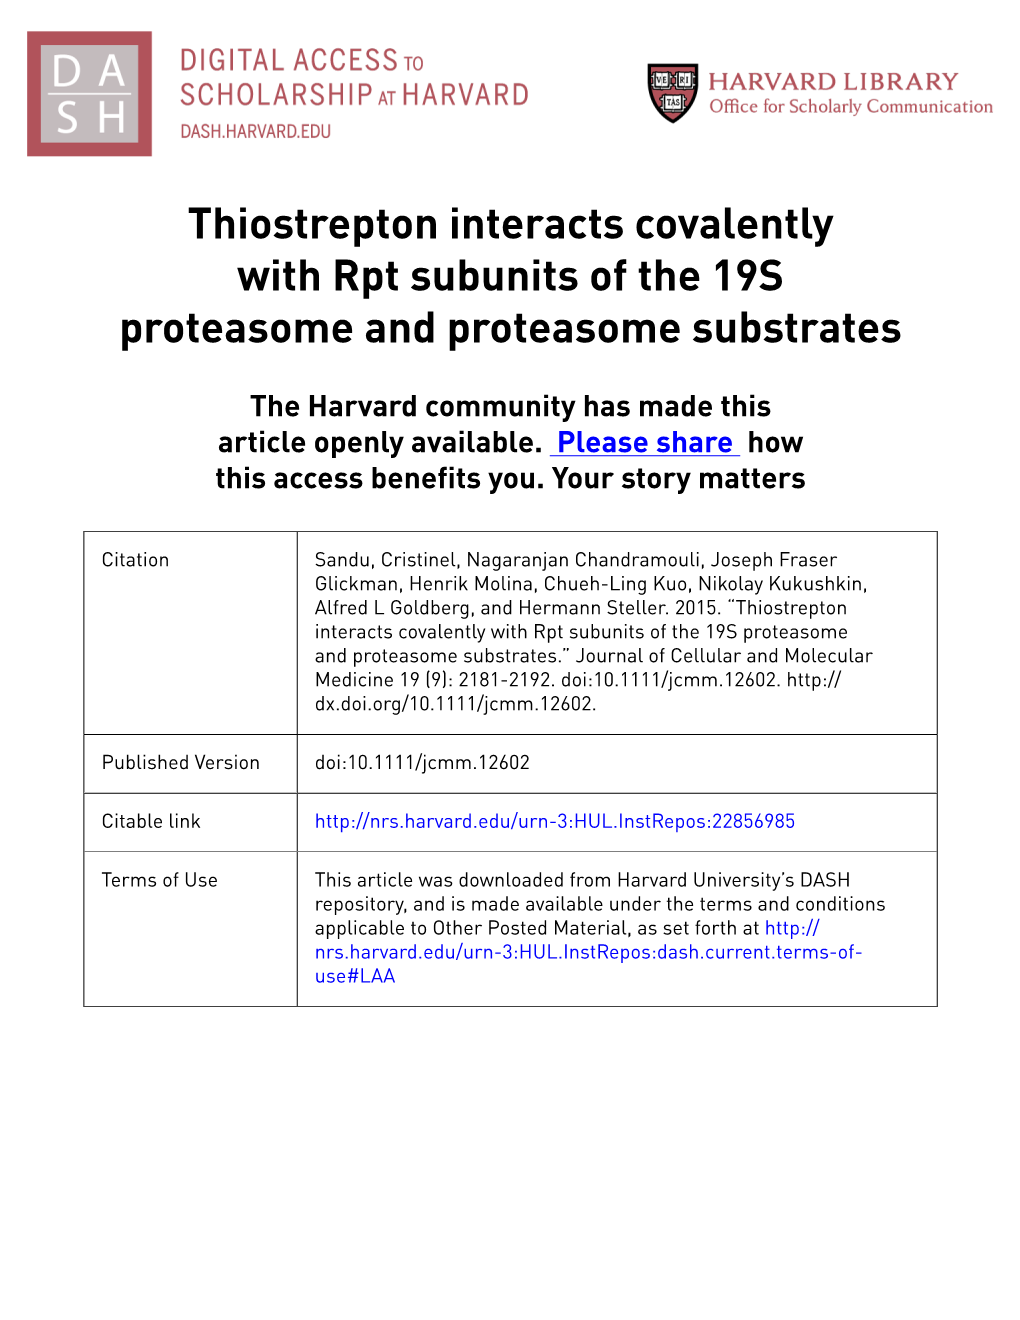 Thiostrepton Interacts Covalently with Rpt Subunits of the 19S Proteasome and Proteasome Substrates